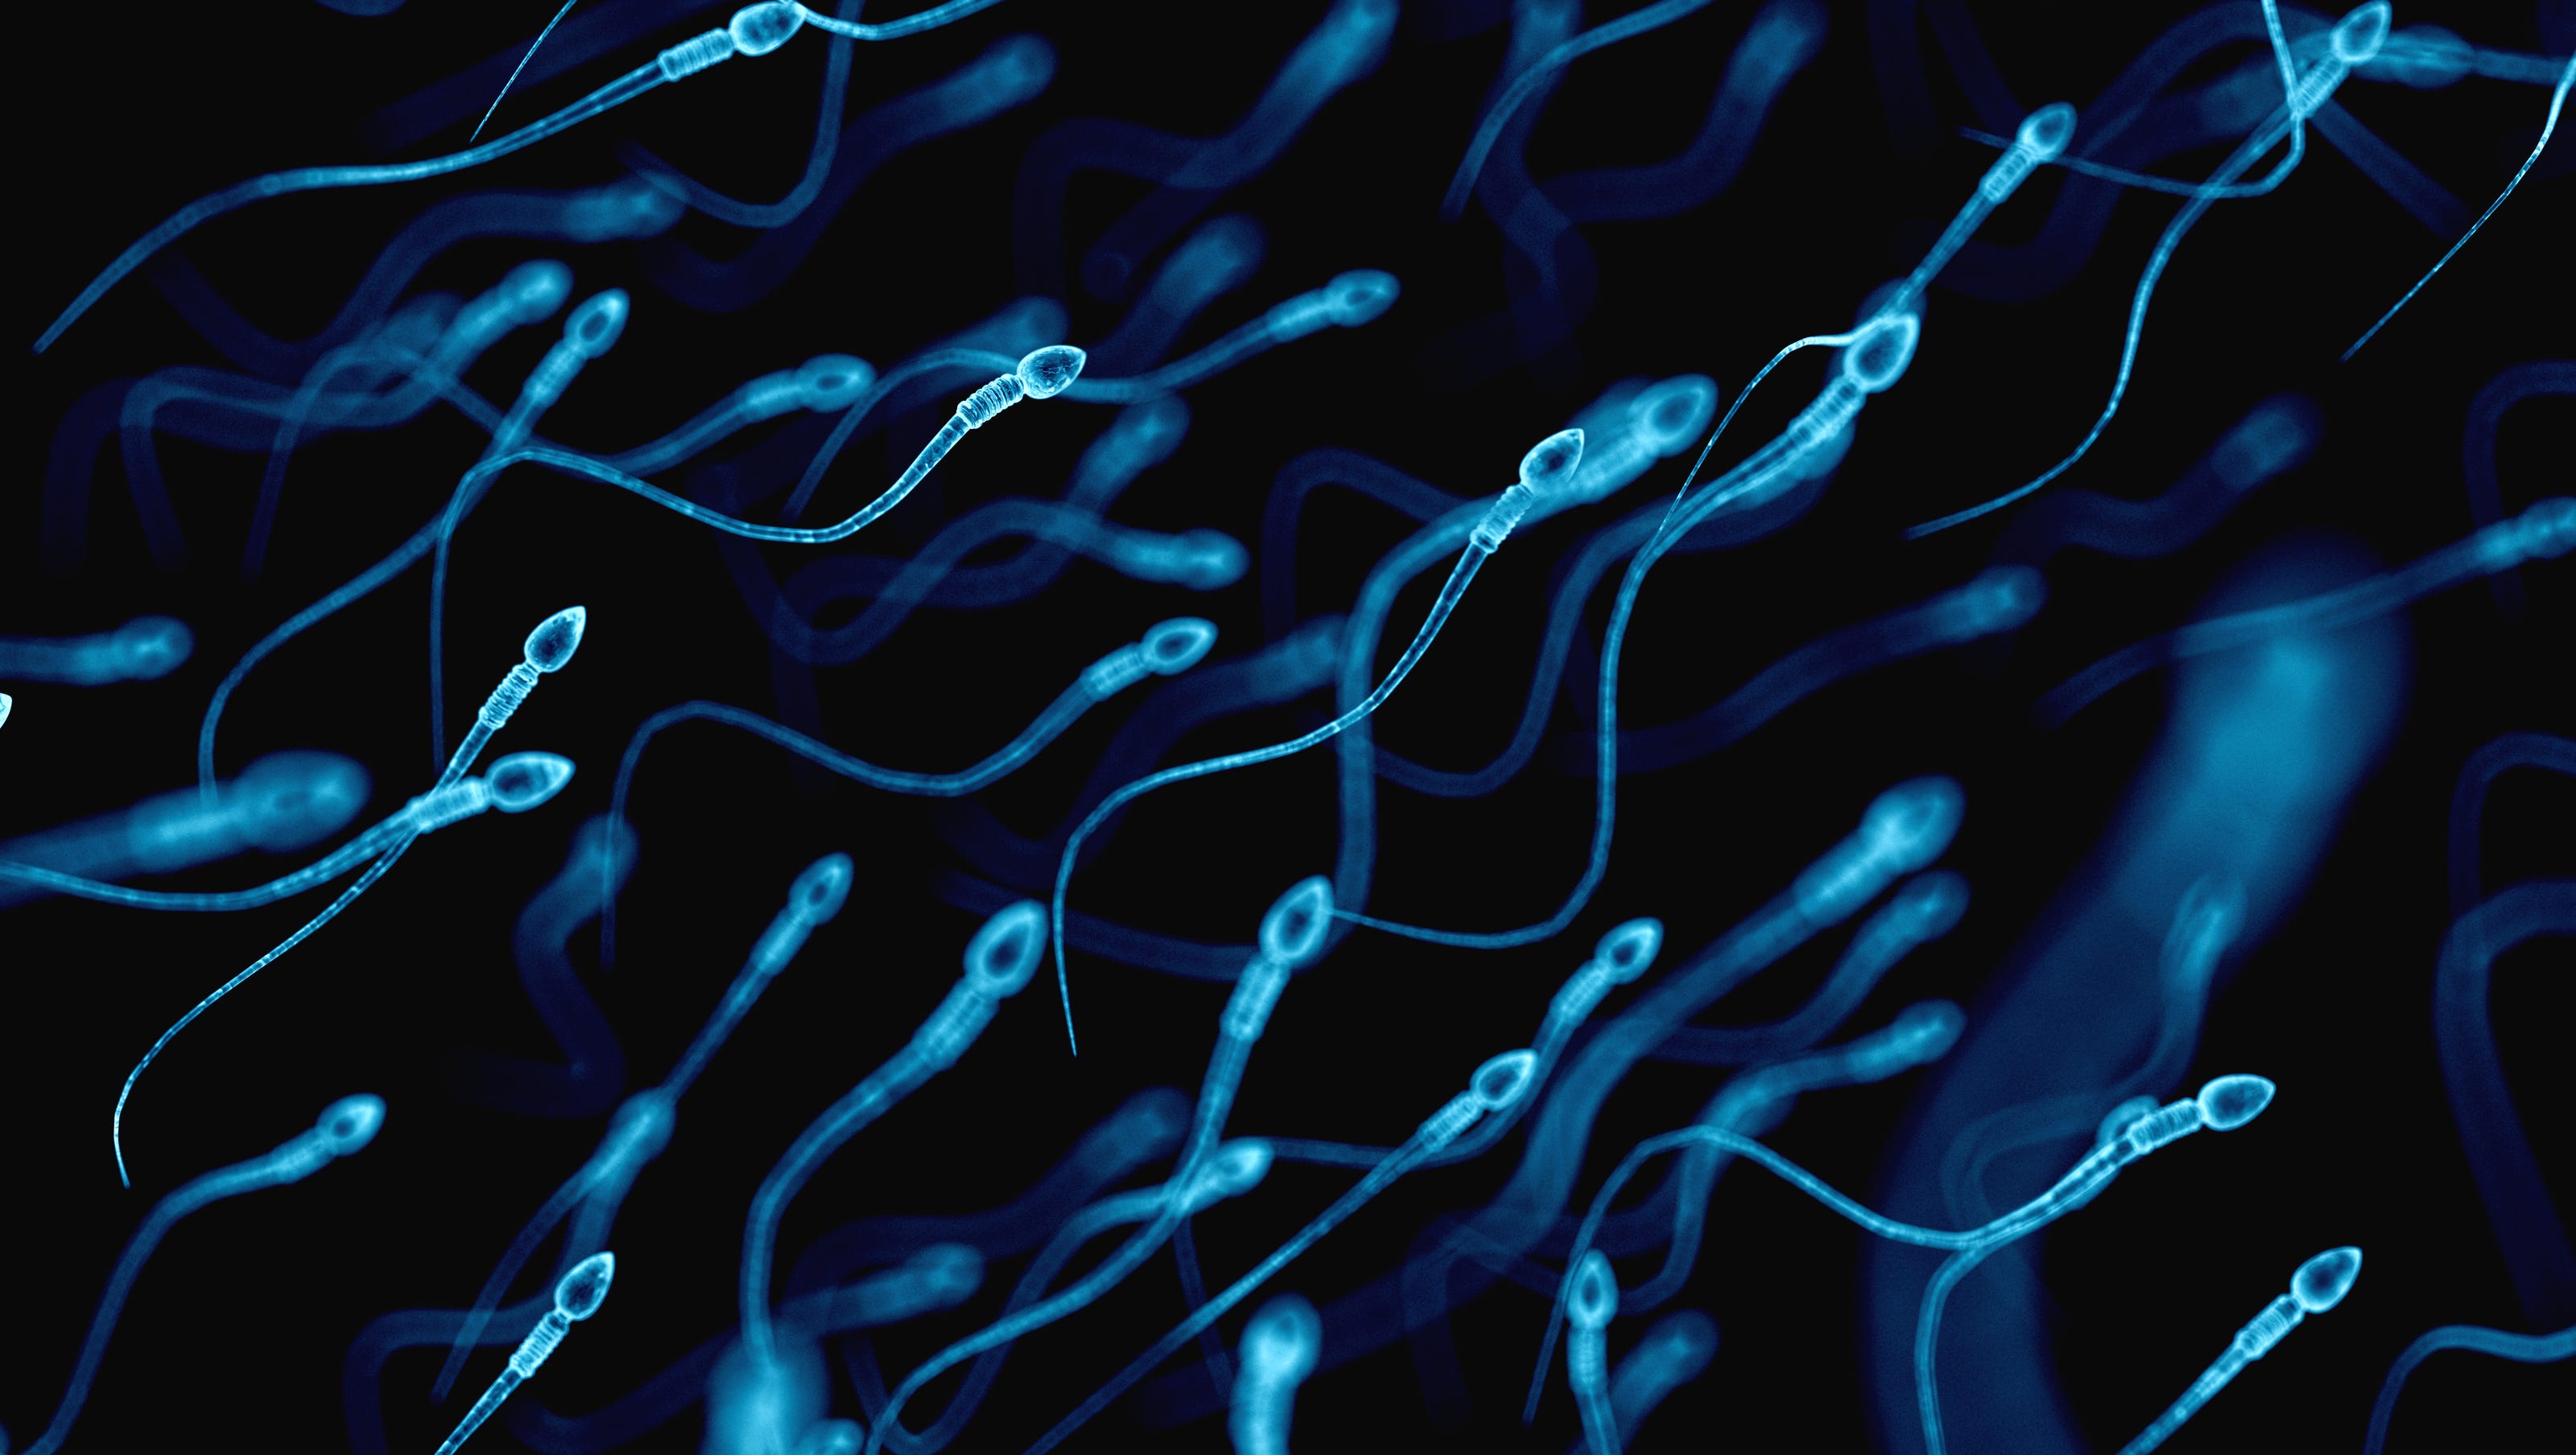 Add falling sperm counts to the list of things threatening human survival, epidemiologist warns - USA TODAY